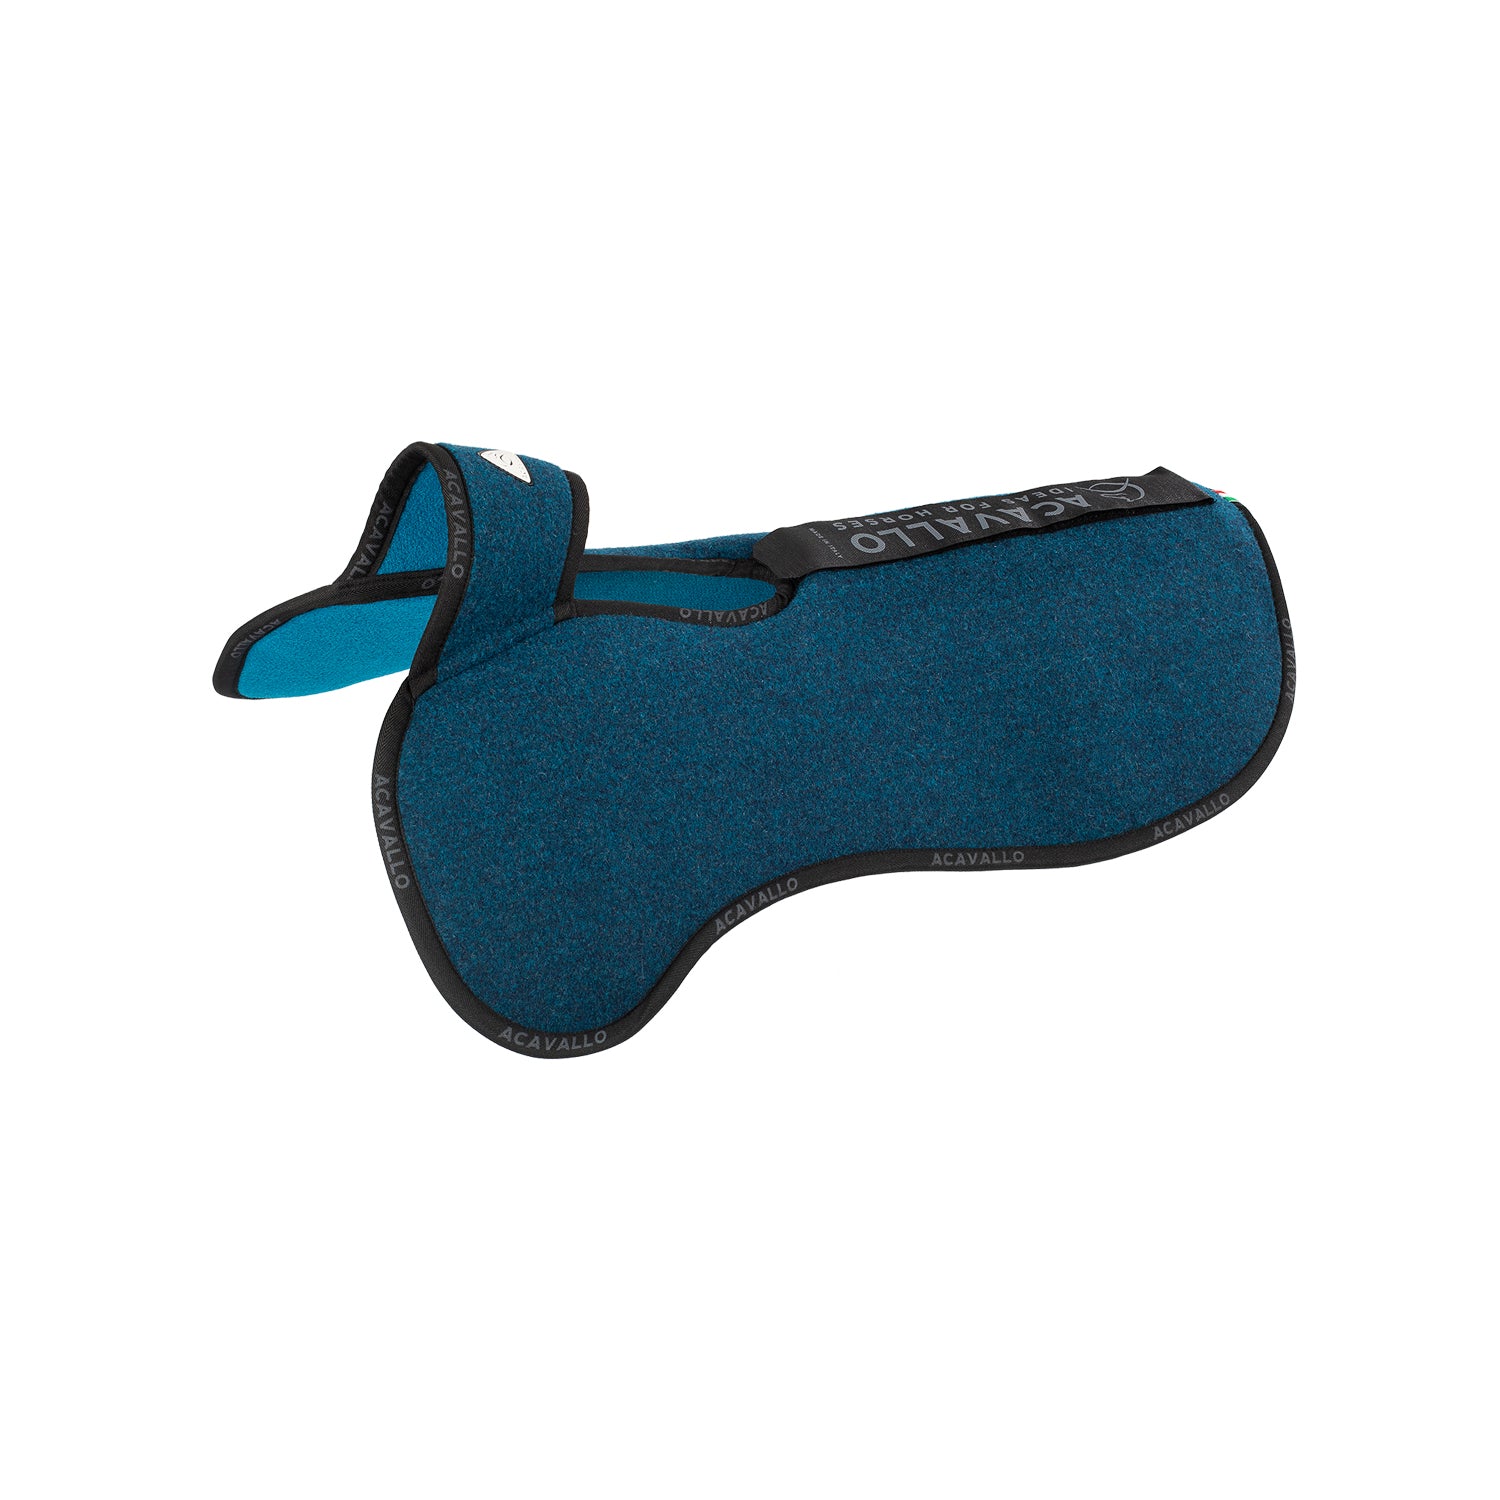 Pad WITHERS FREE FRONT RISER CONFIGURATION WITH DOUBLE FELT - Reitstiefel Kandel - Dein Reitshop